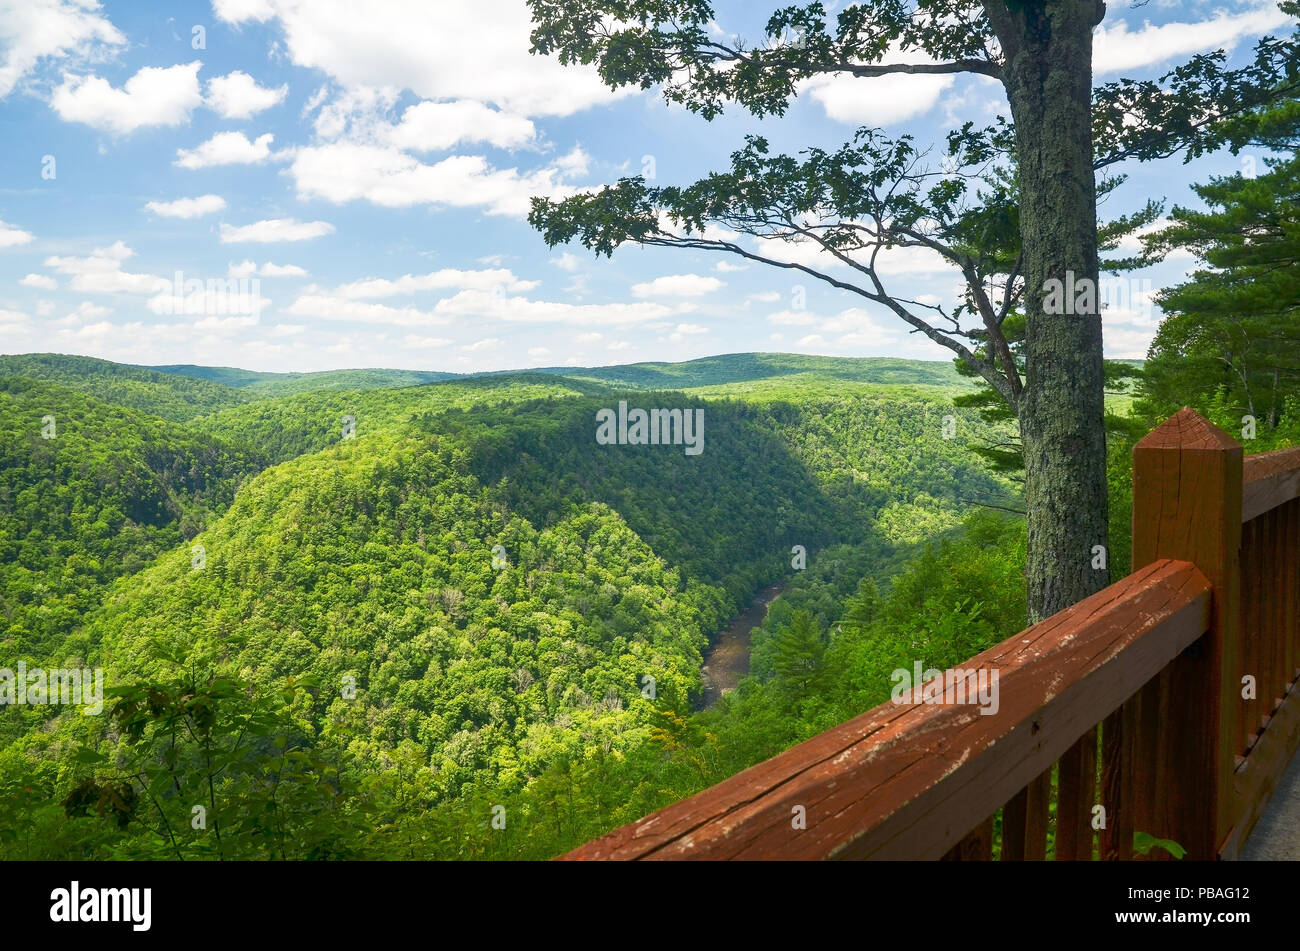 Pine Creek Gorge, also called the Grand Canyon of Pennsylvania. A 47 mile long, 1000 foot deep gorge that winds through north-central Pennsylvania. Stock Photo